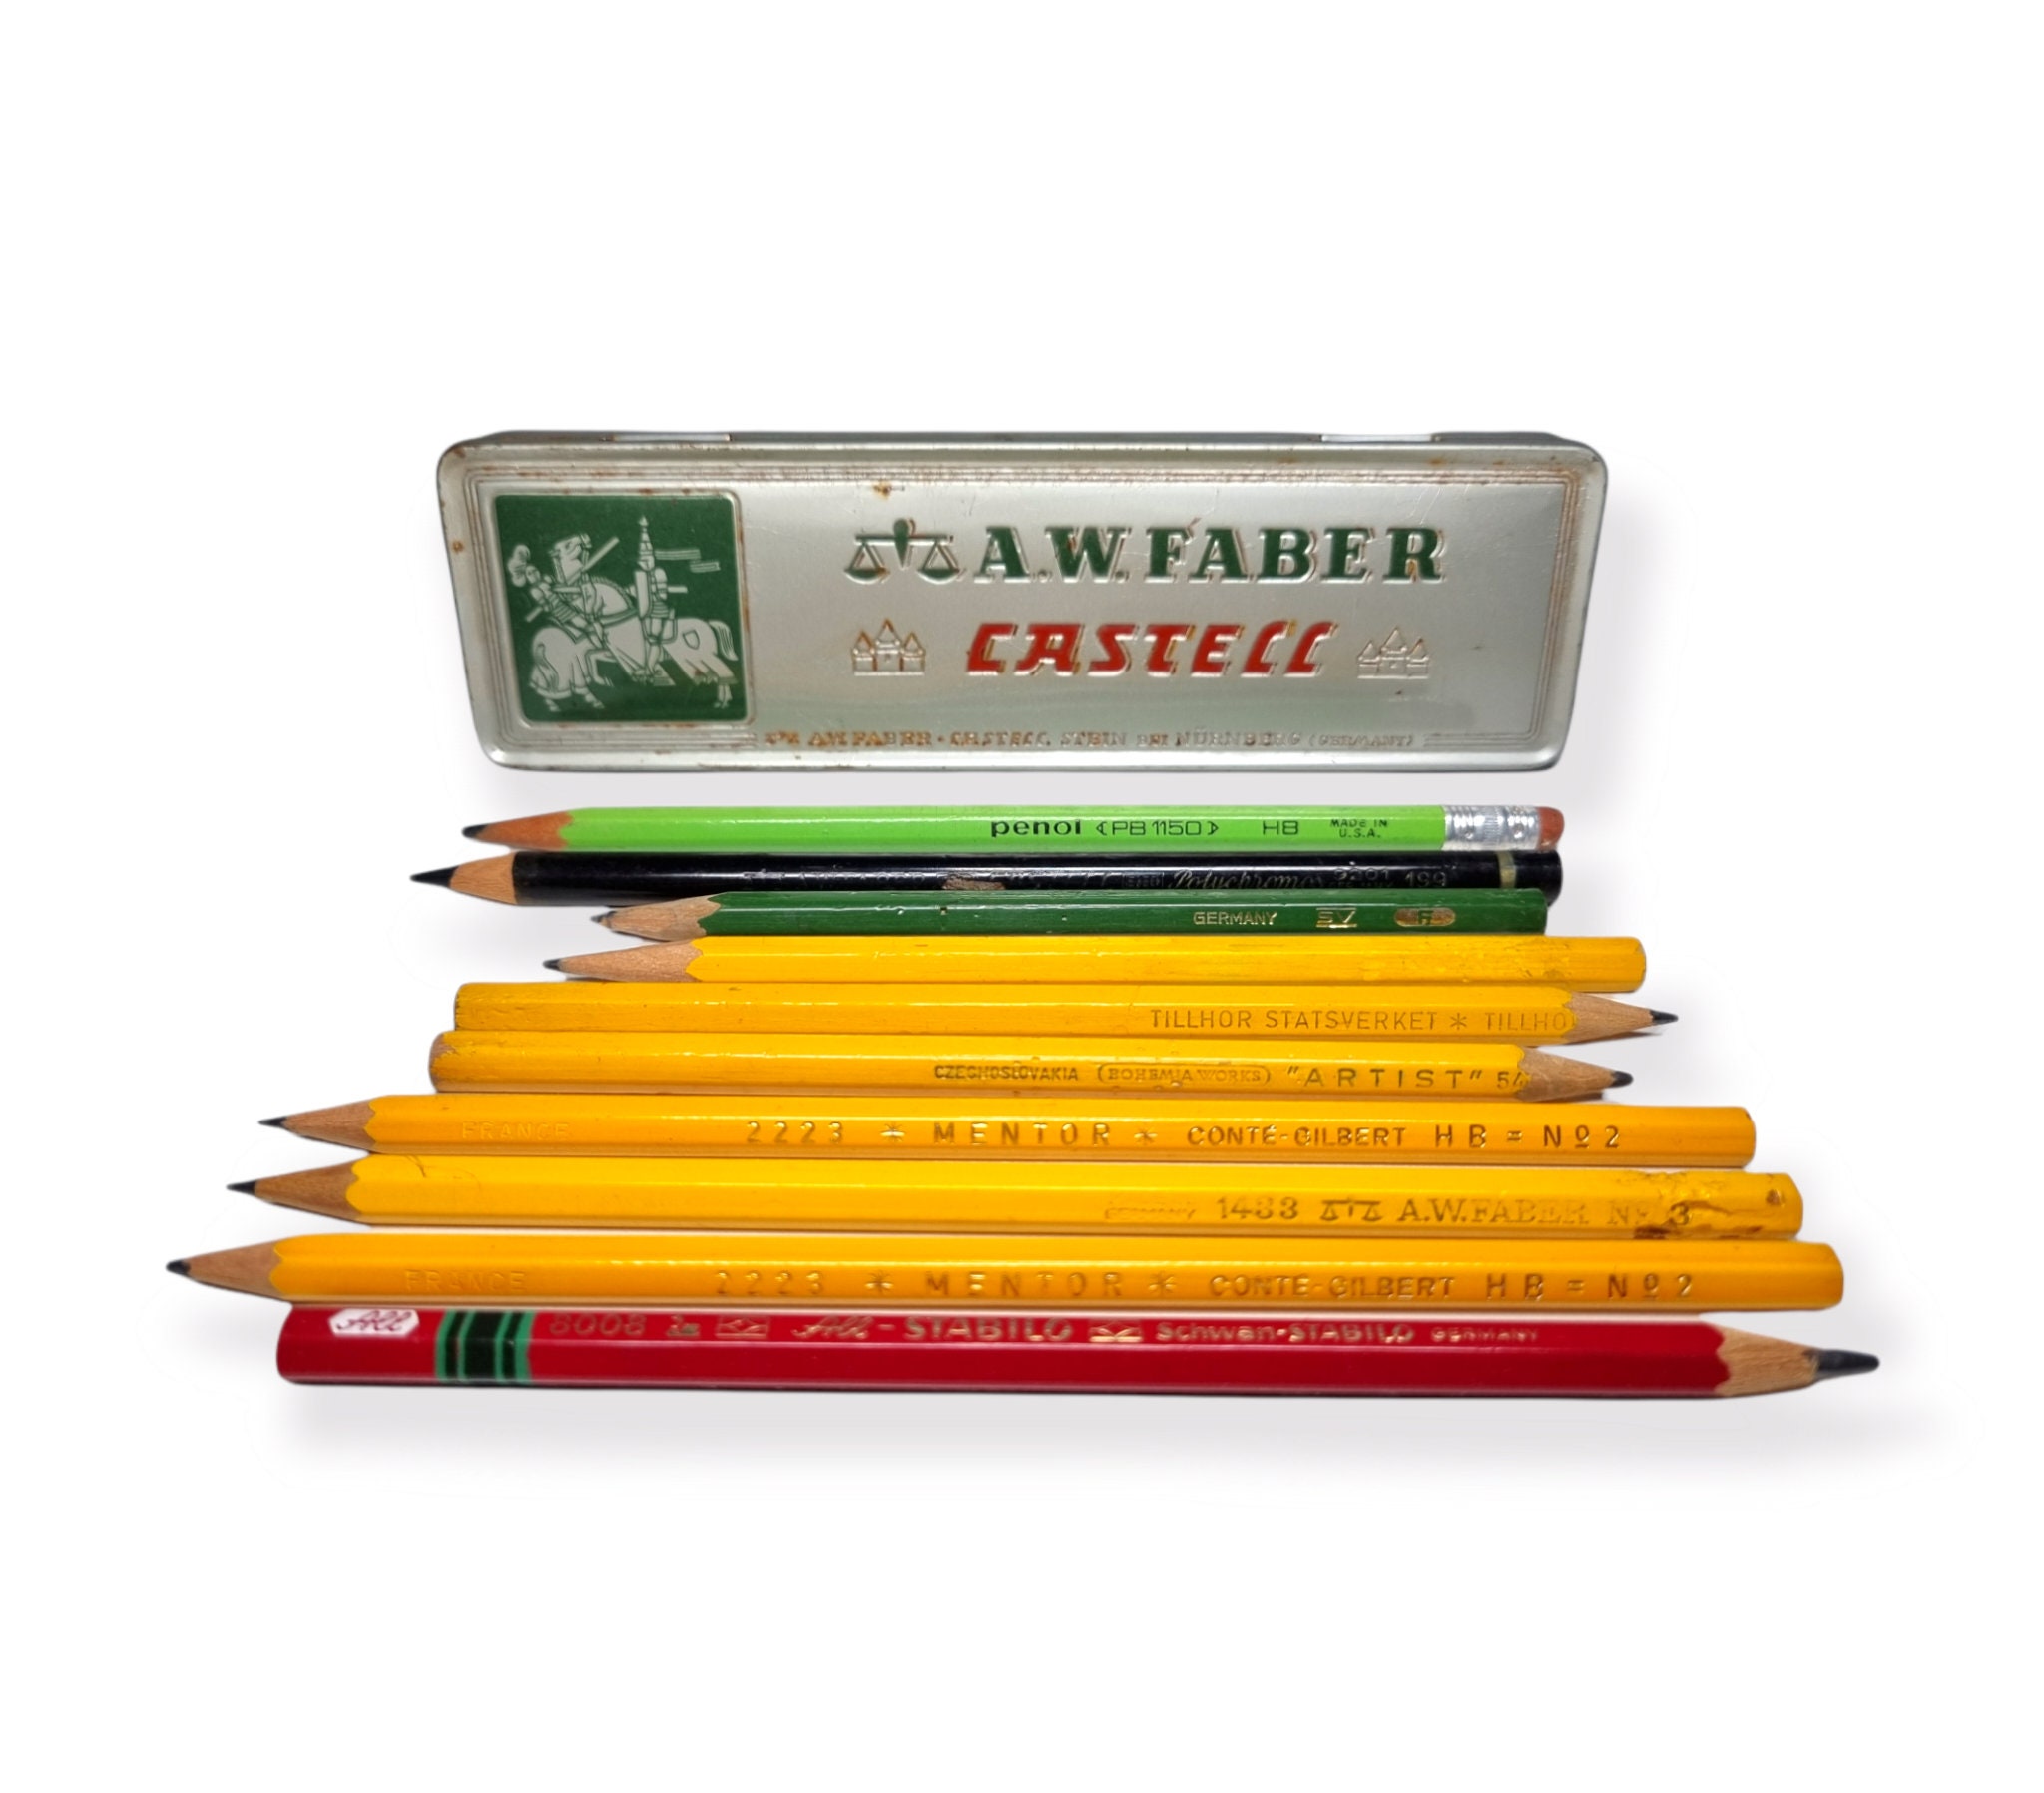 VINTAGE FABER CASTELL METAL PENCIL BOX WITH PENCILS IN OUTER CARDBOARD BOX